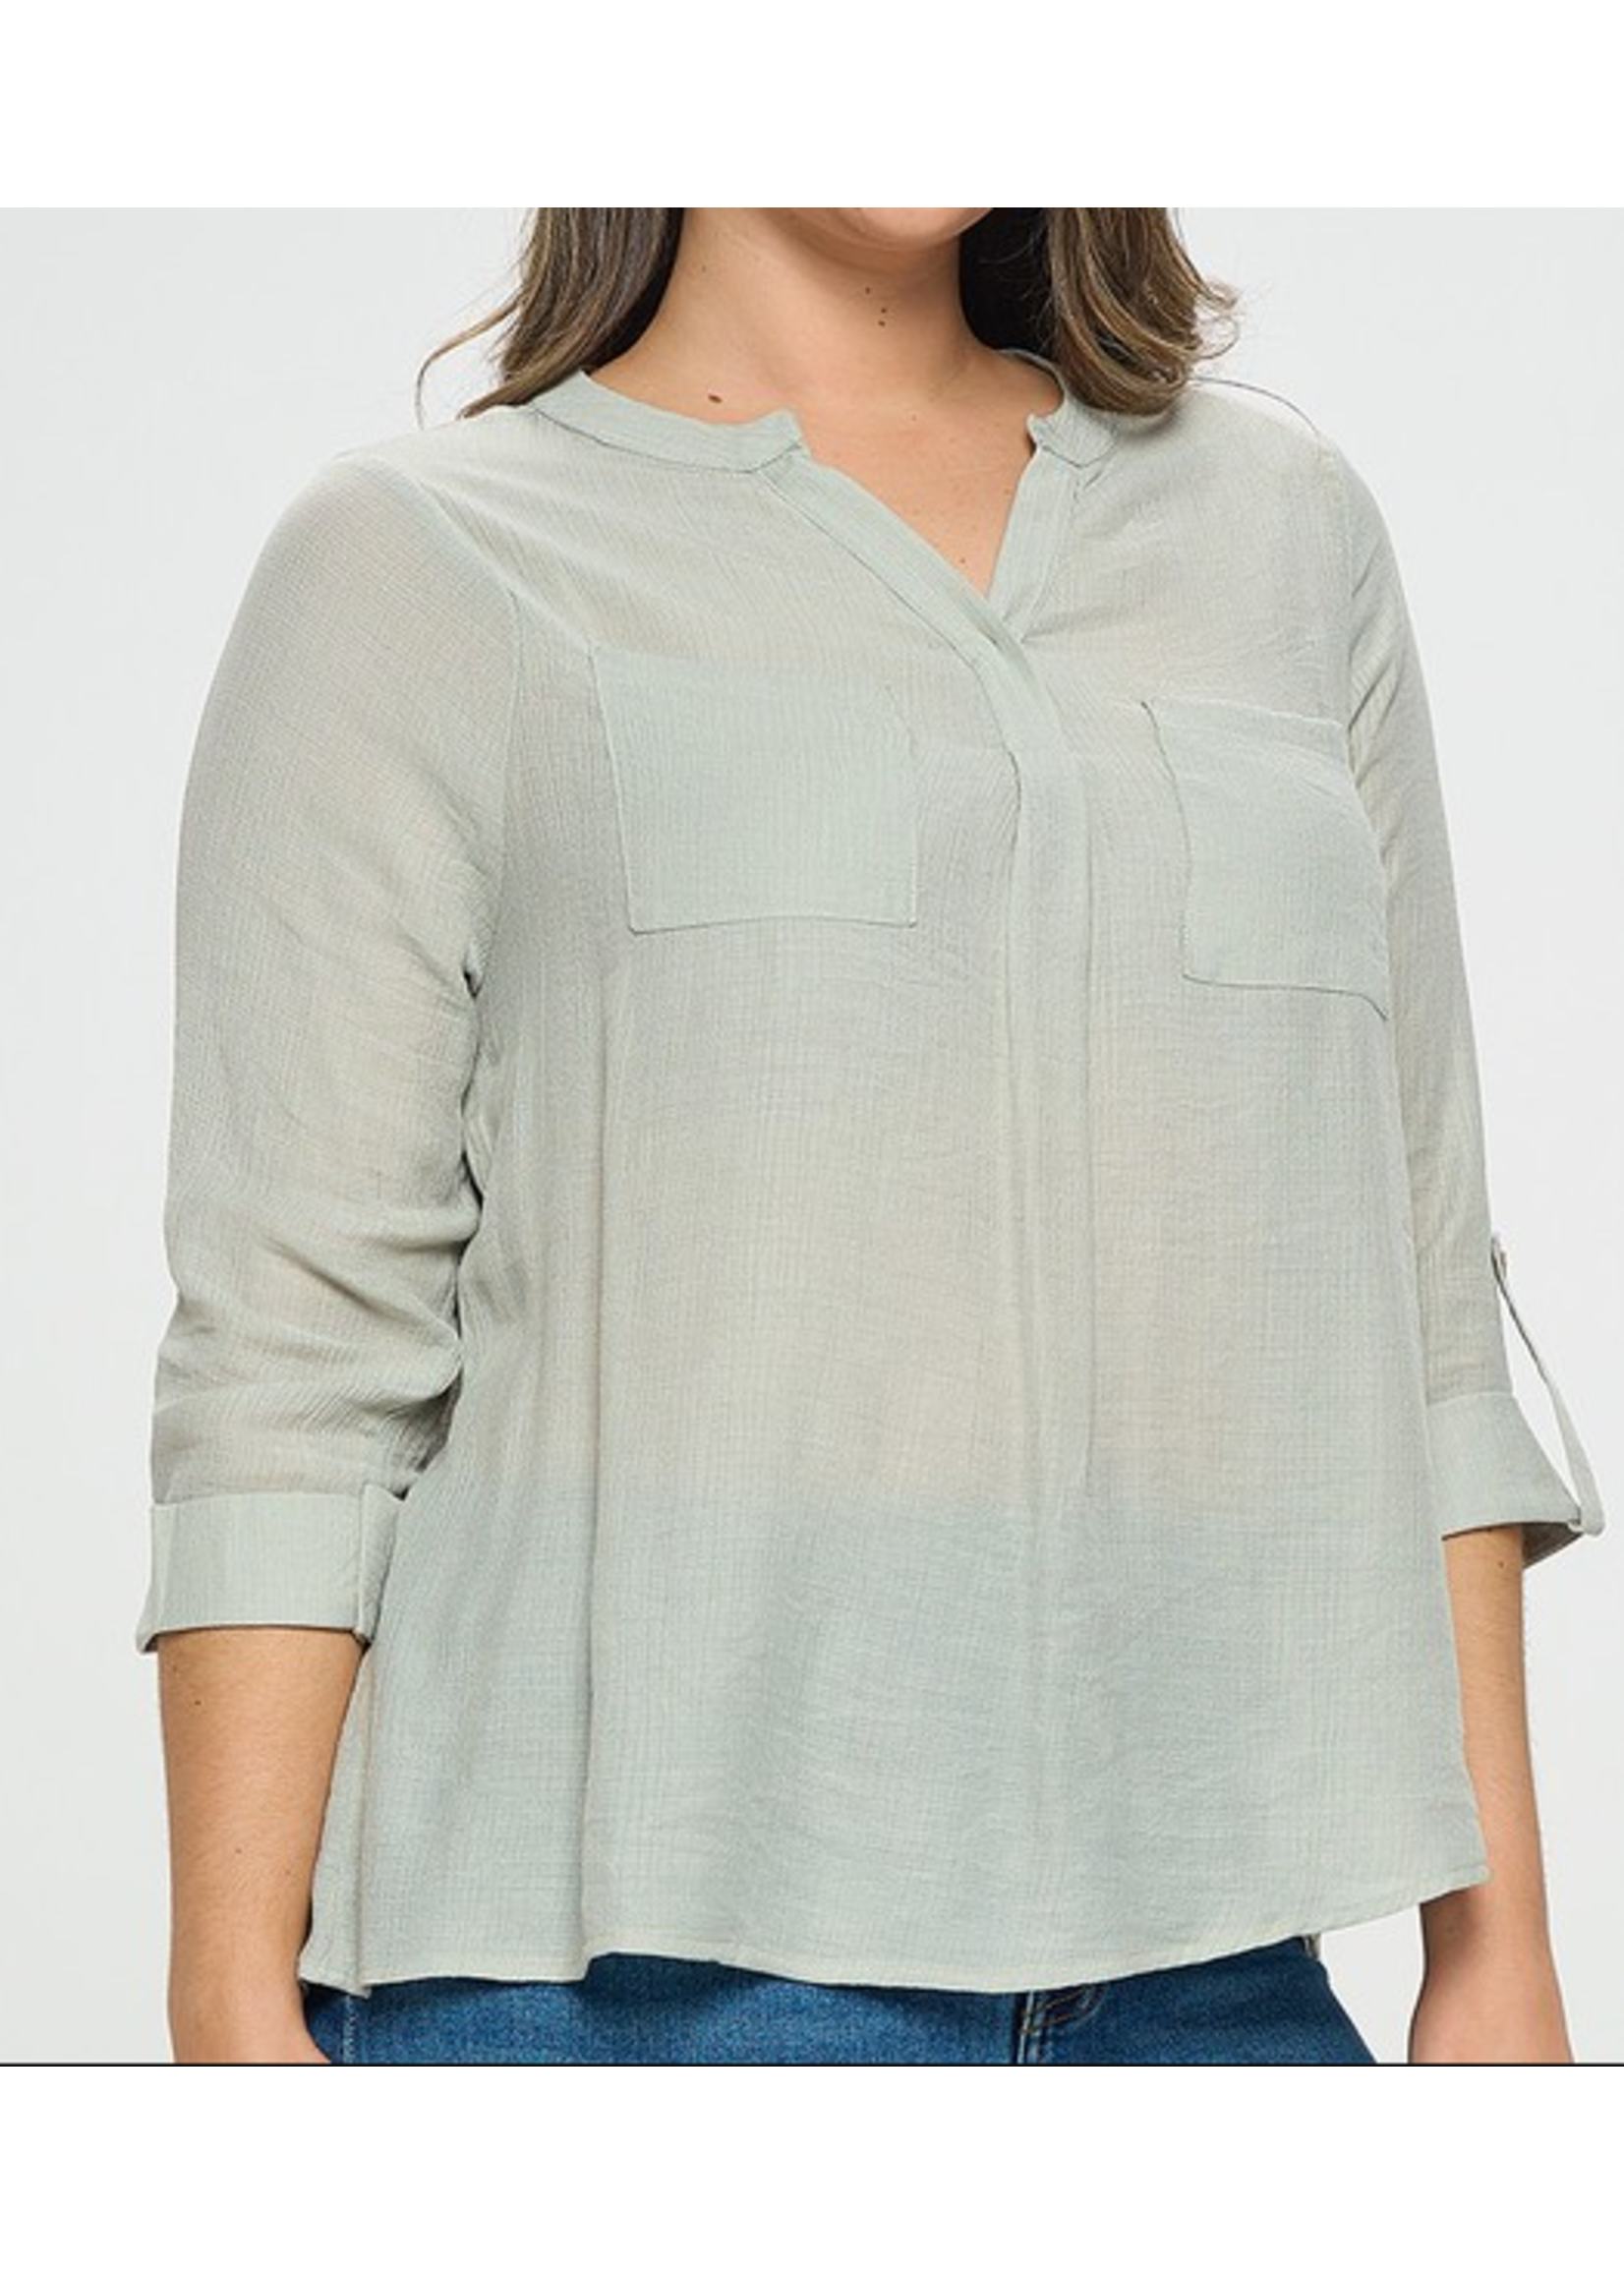 TPIT5469 - PLUS QUARTER SLEEVE RELAXED FIT BLOUSE